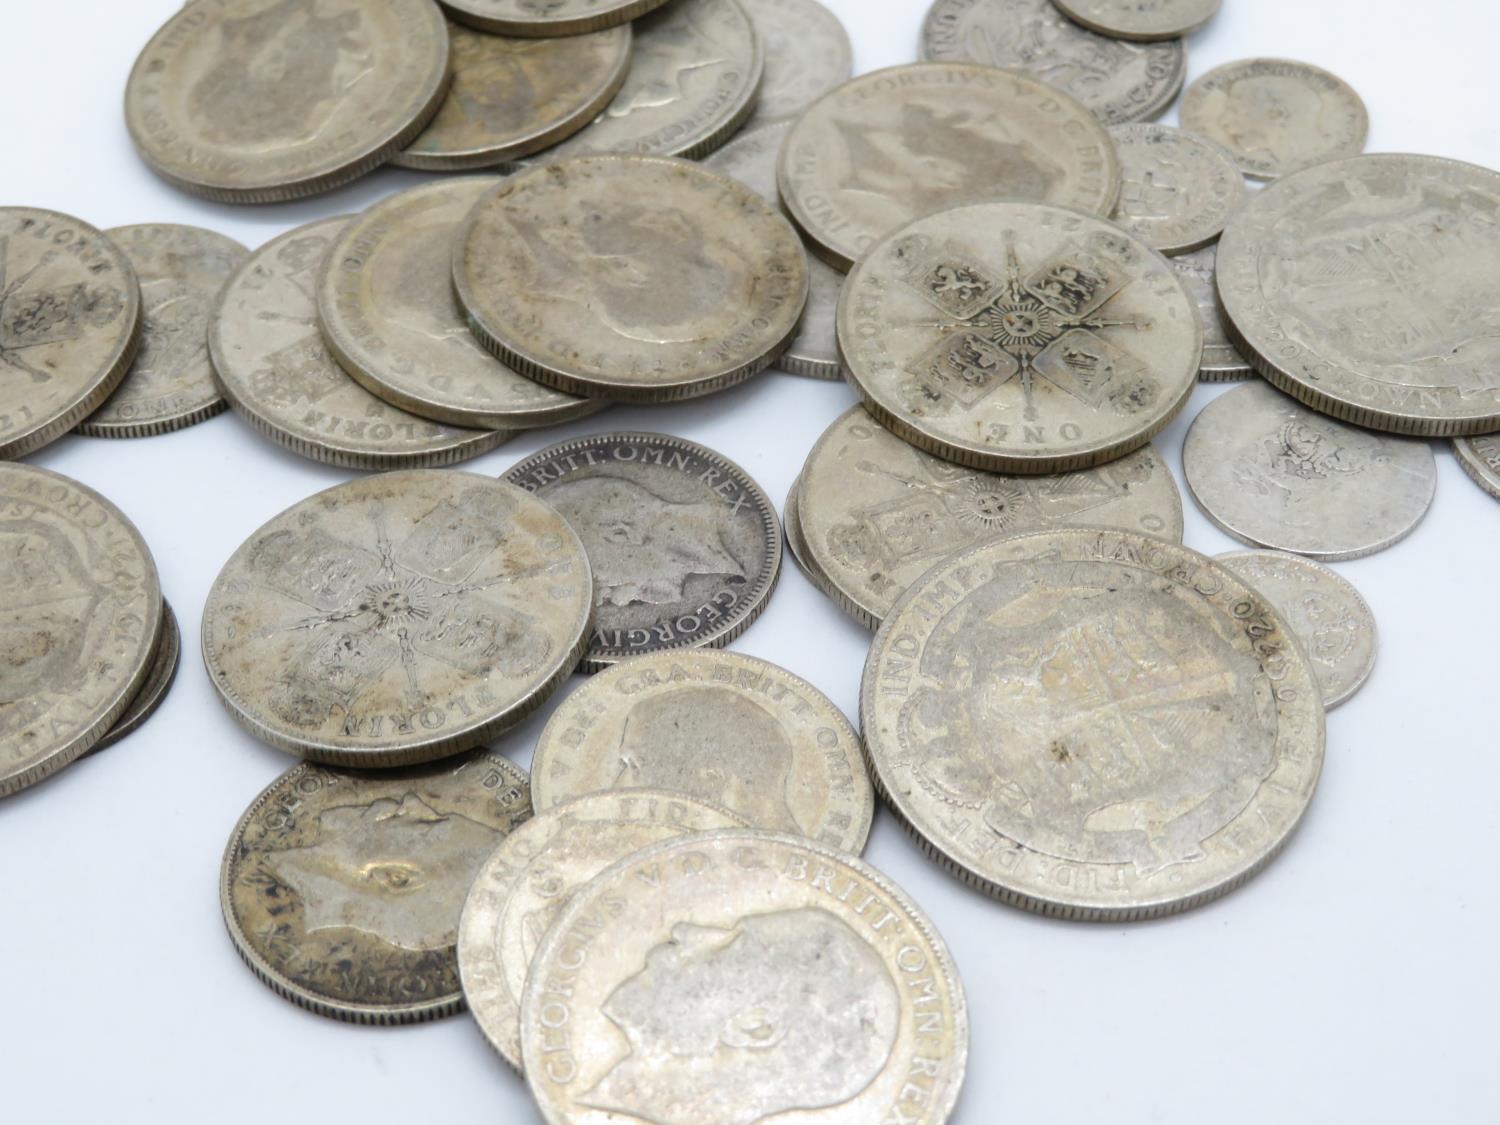 244g pre 1947 British coins - Image 2 of 2